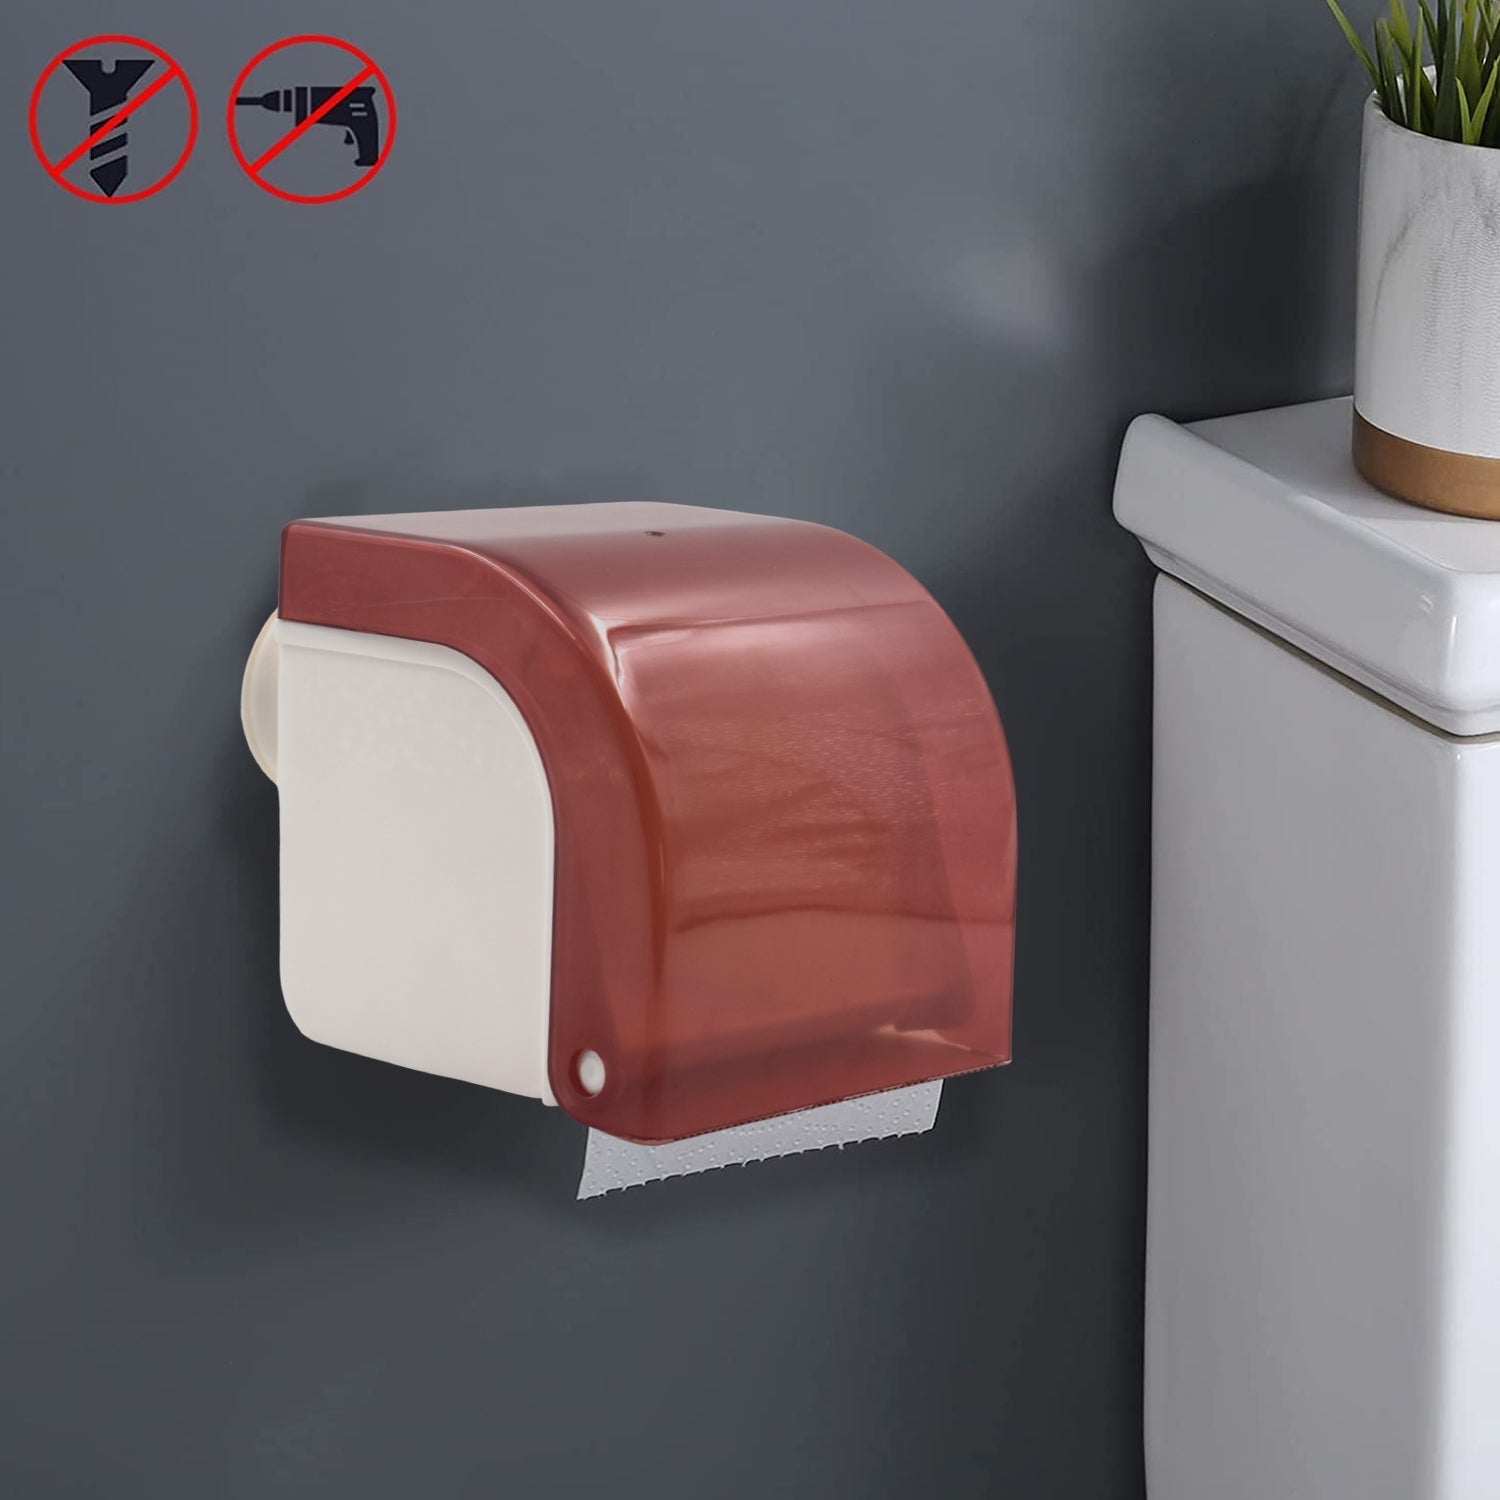 1789 Wall Tissue Holder Used for Holding Tissues Responsible for Cleaning and Wiping of Hands and Some Other Accessories. DeoDap